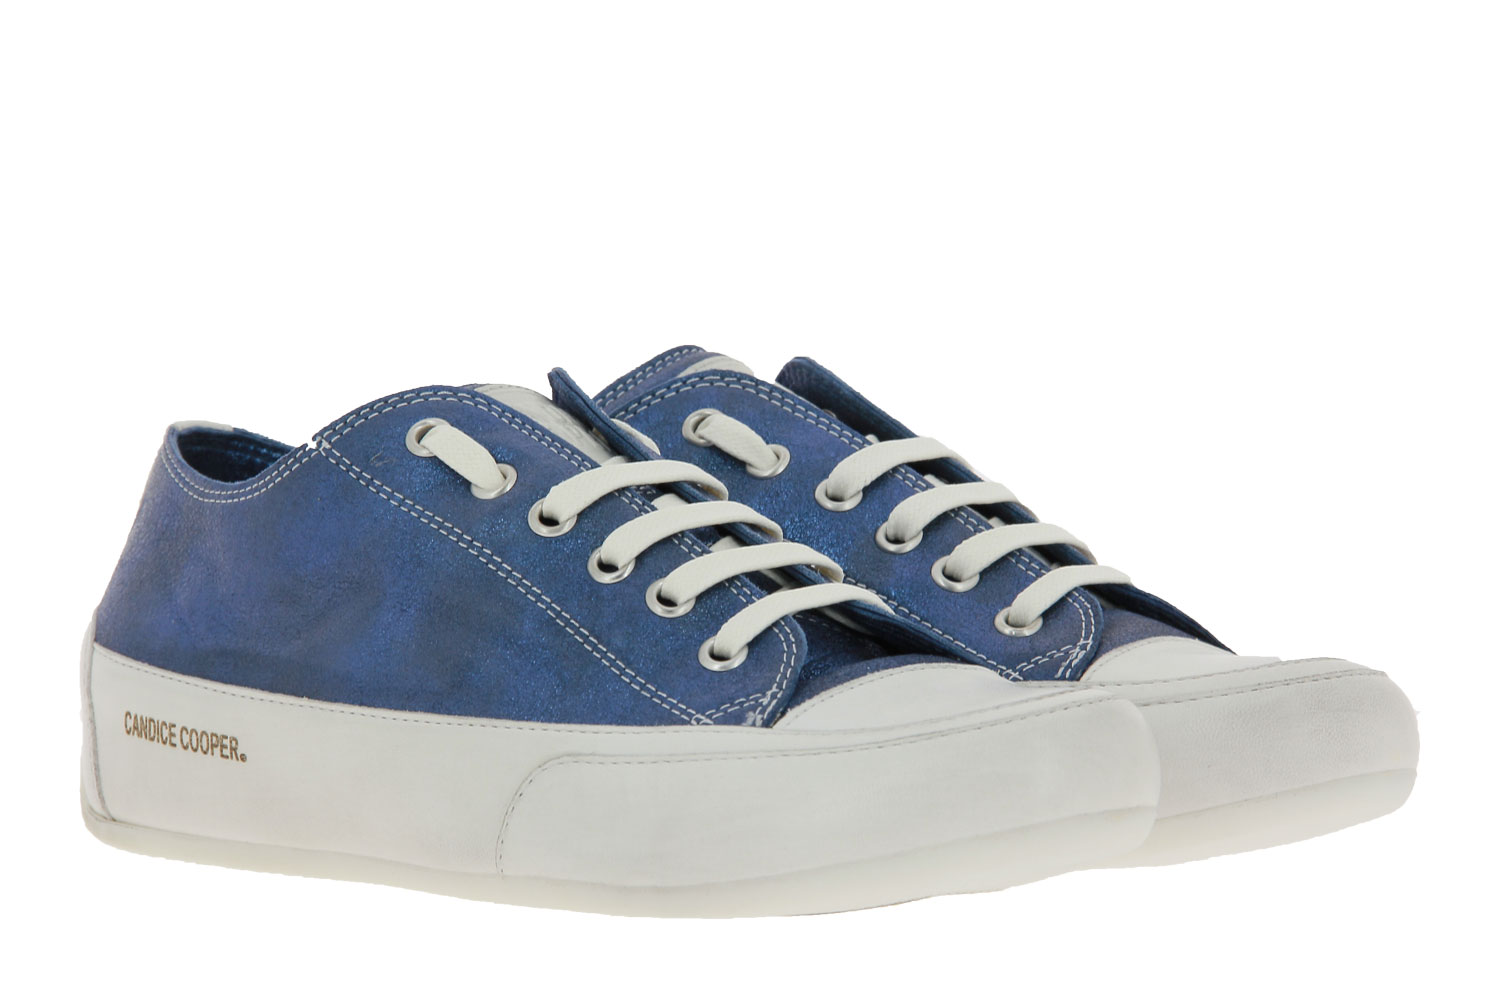 Candice Cooper Sneaker ROCK PASSION NAVY (39)